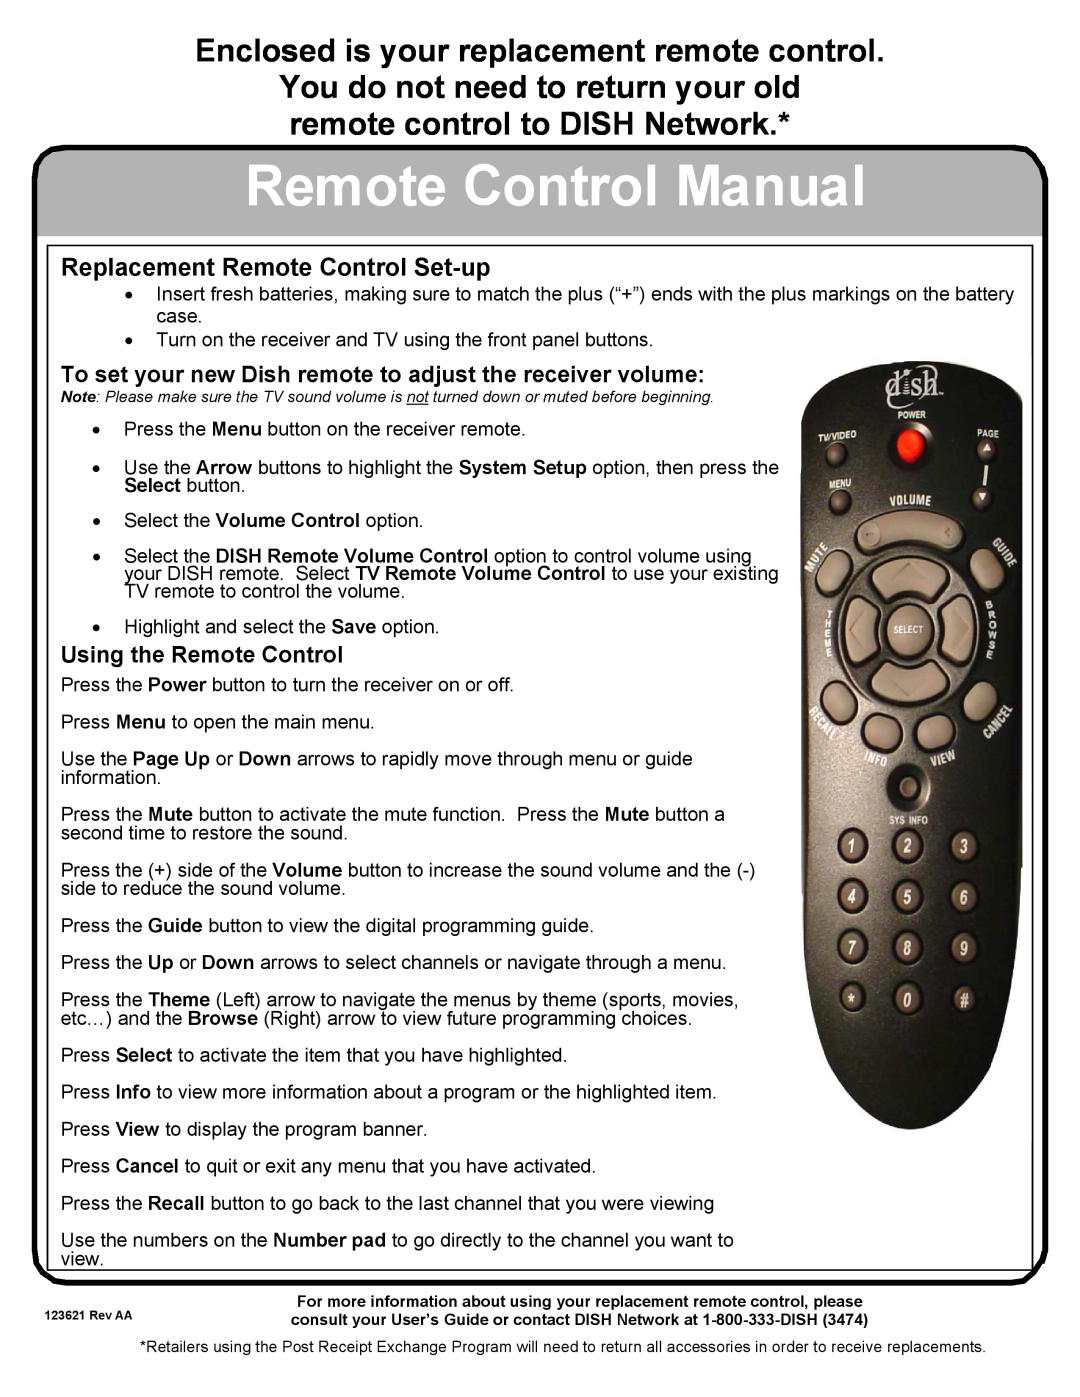 Dish Network 1.5 manual Enclosed is your replacement remote control, Replacement Remote Control Set-up 